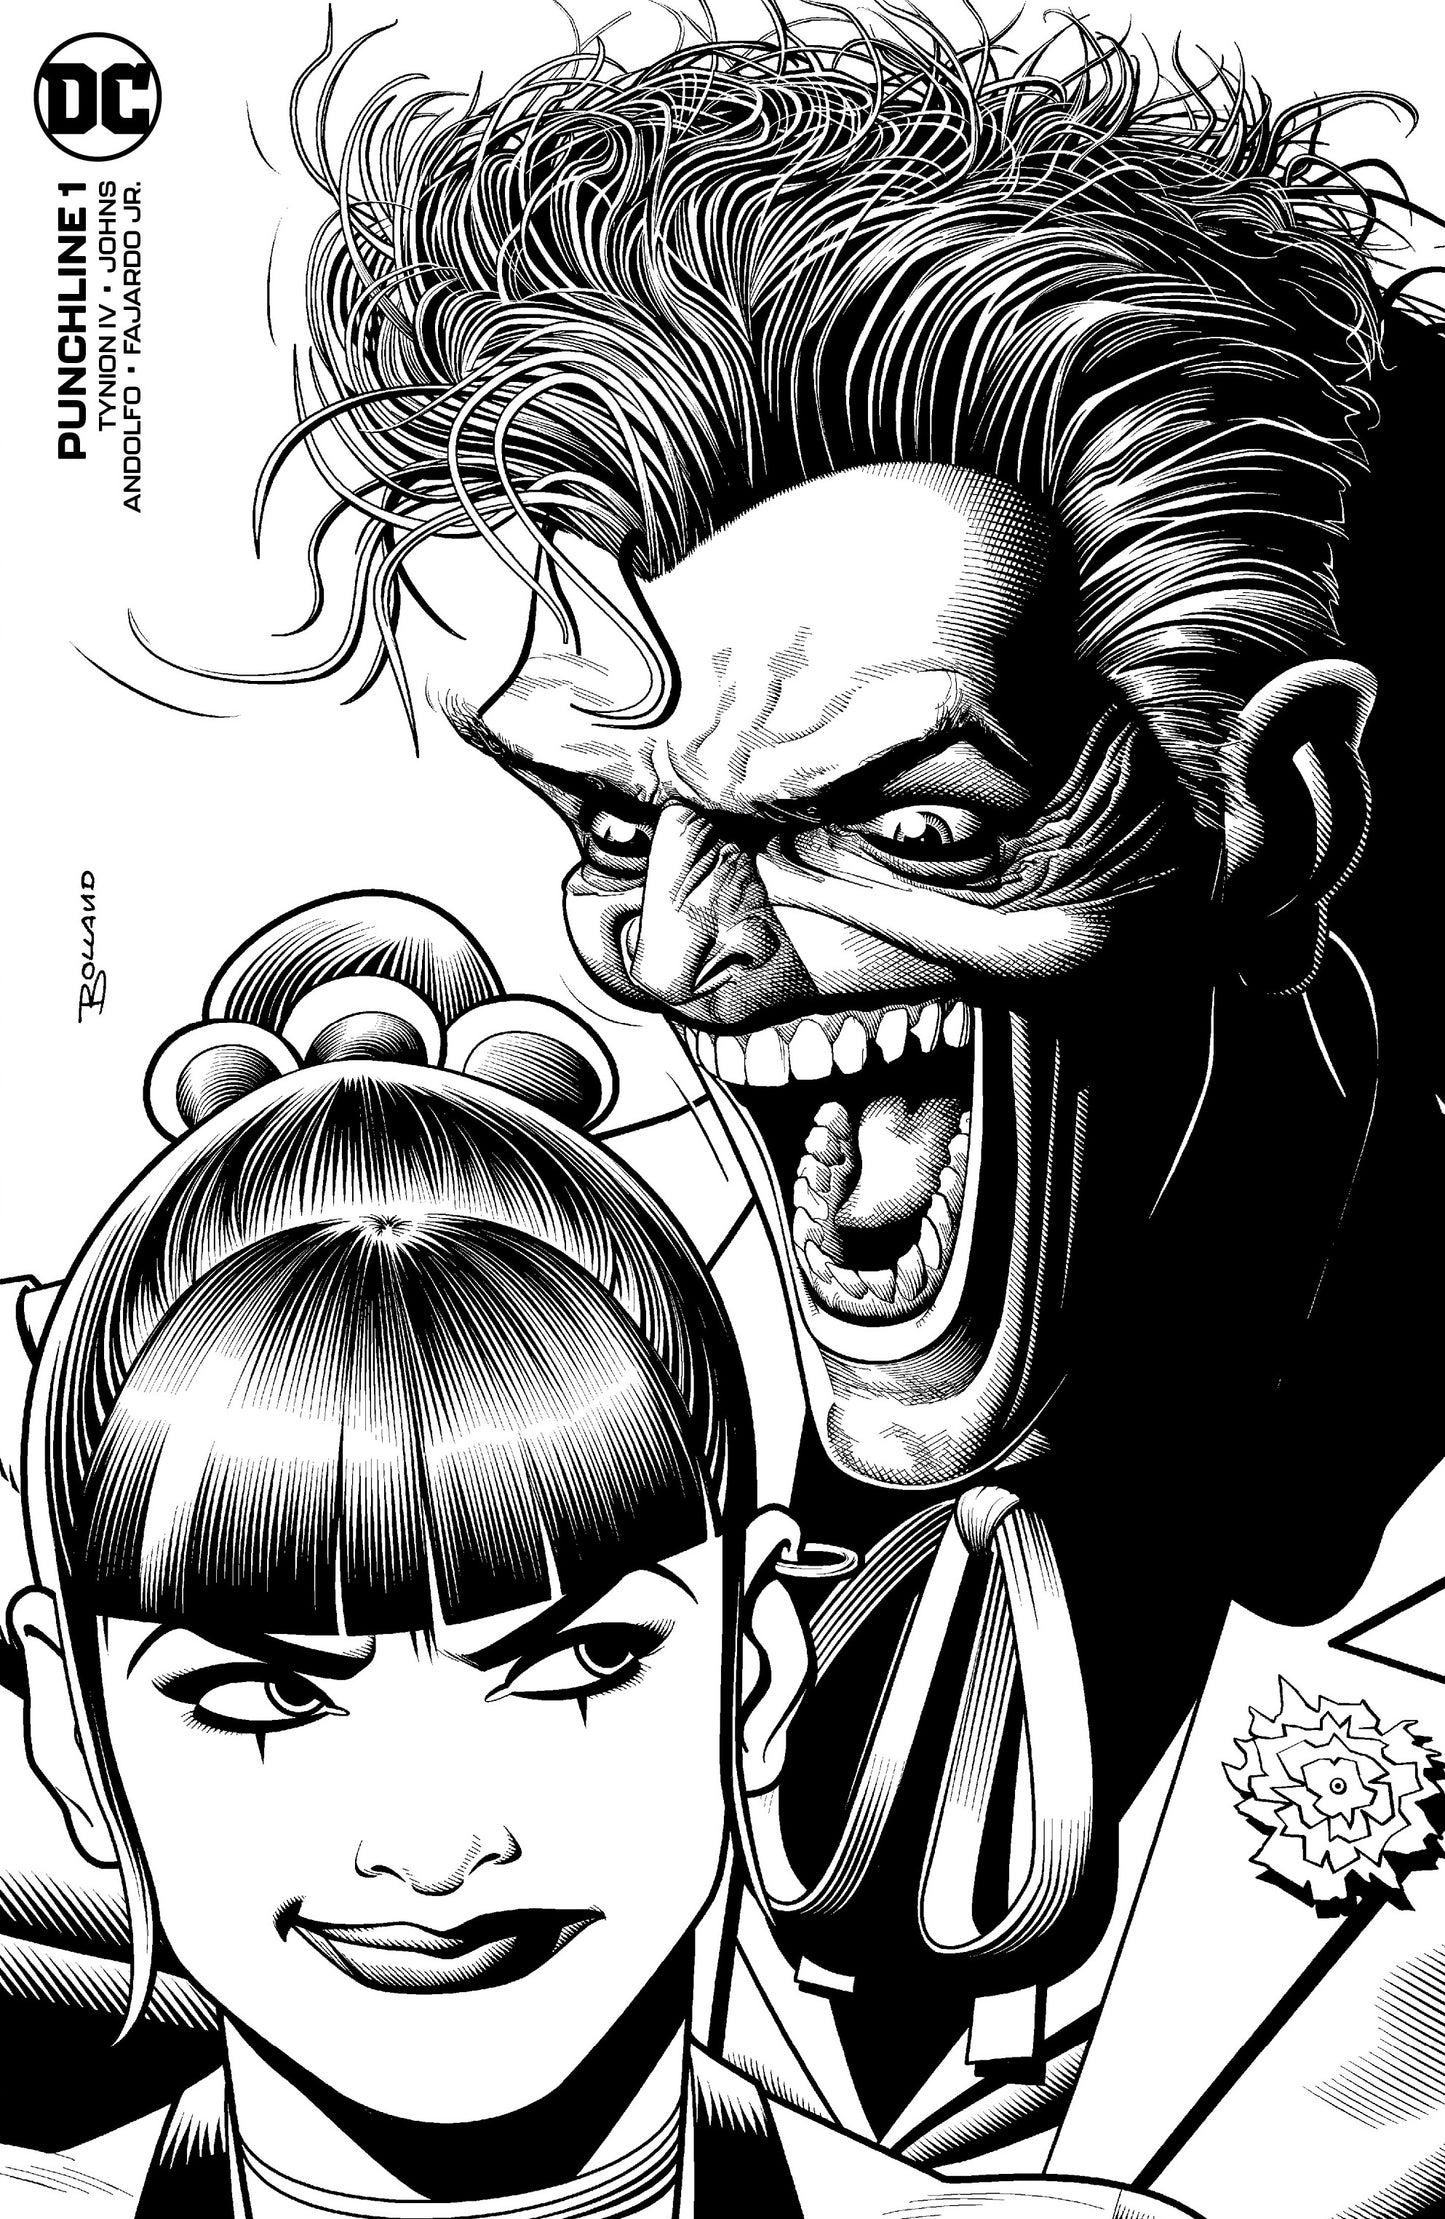 PUNCHLINE SPECIAL #1 BRAIN BOLLAND UK EXCLUSIVE B&W VARIANT LIMITED TO 2500